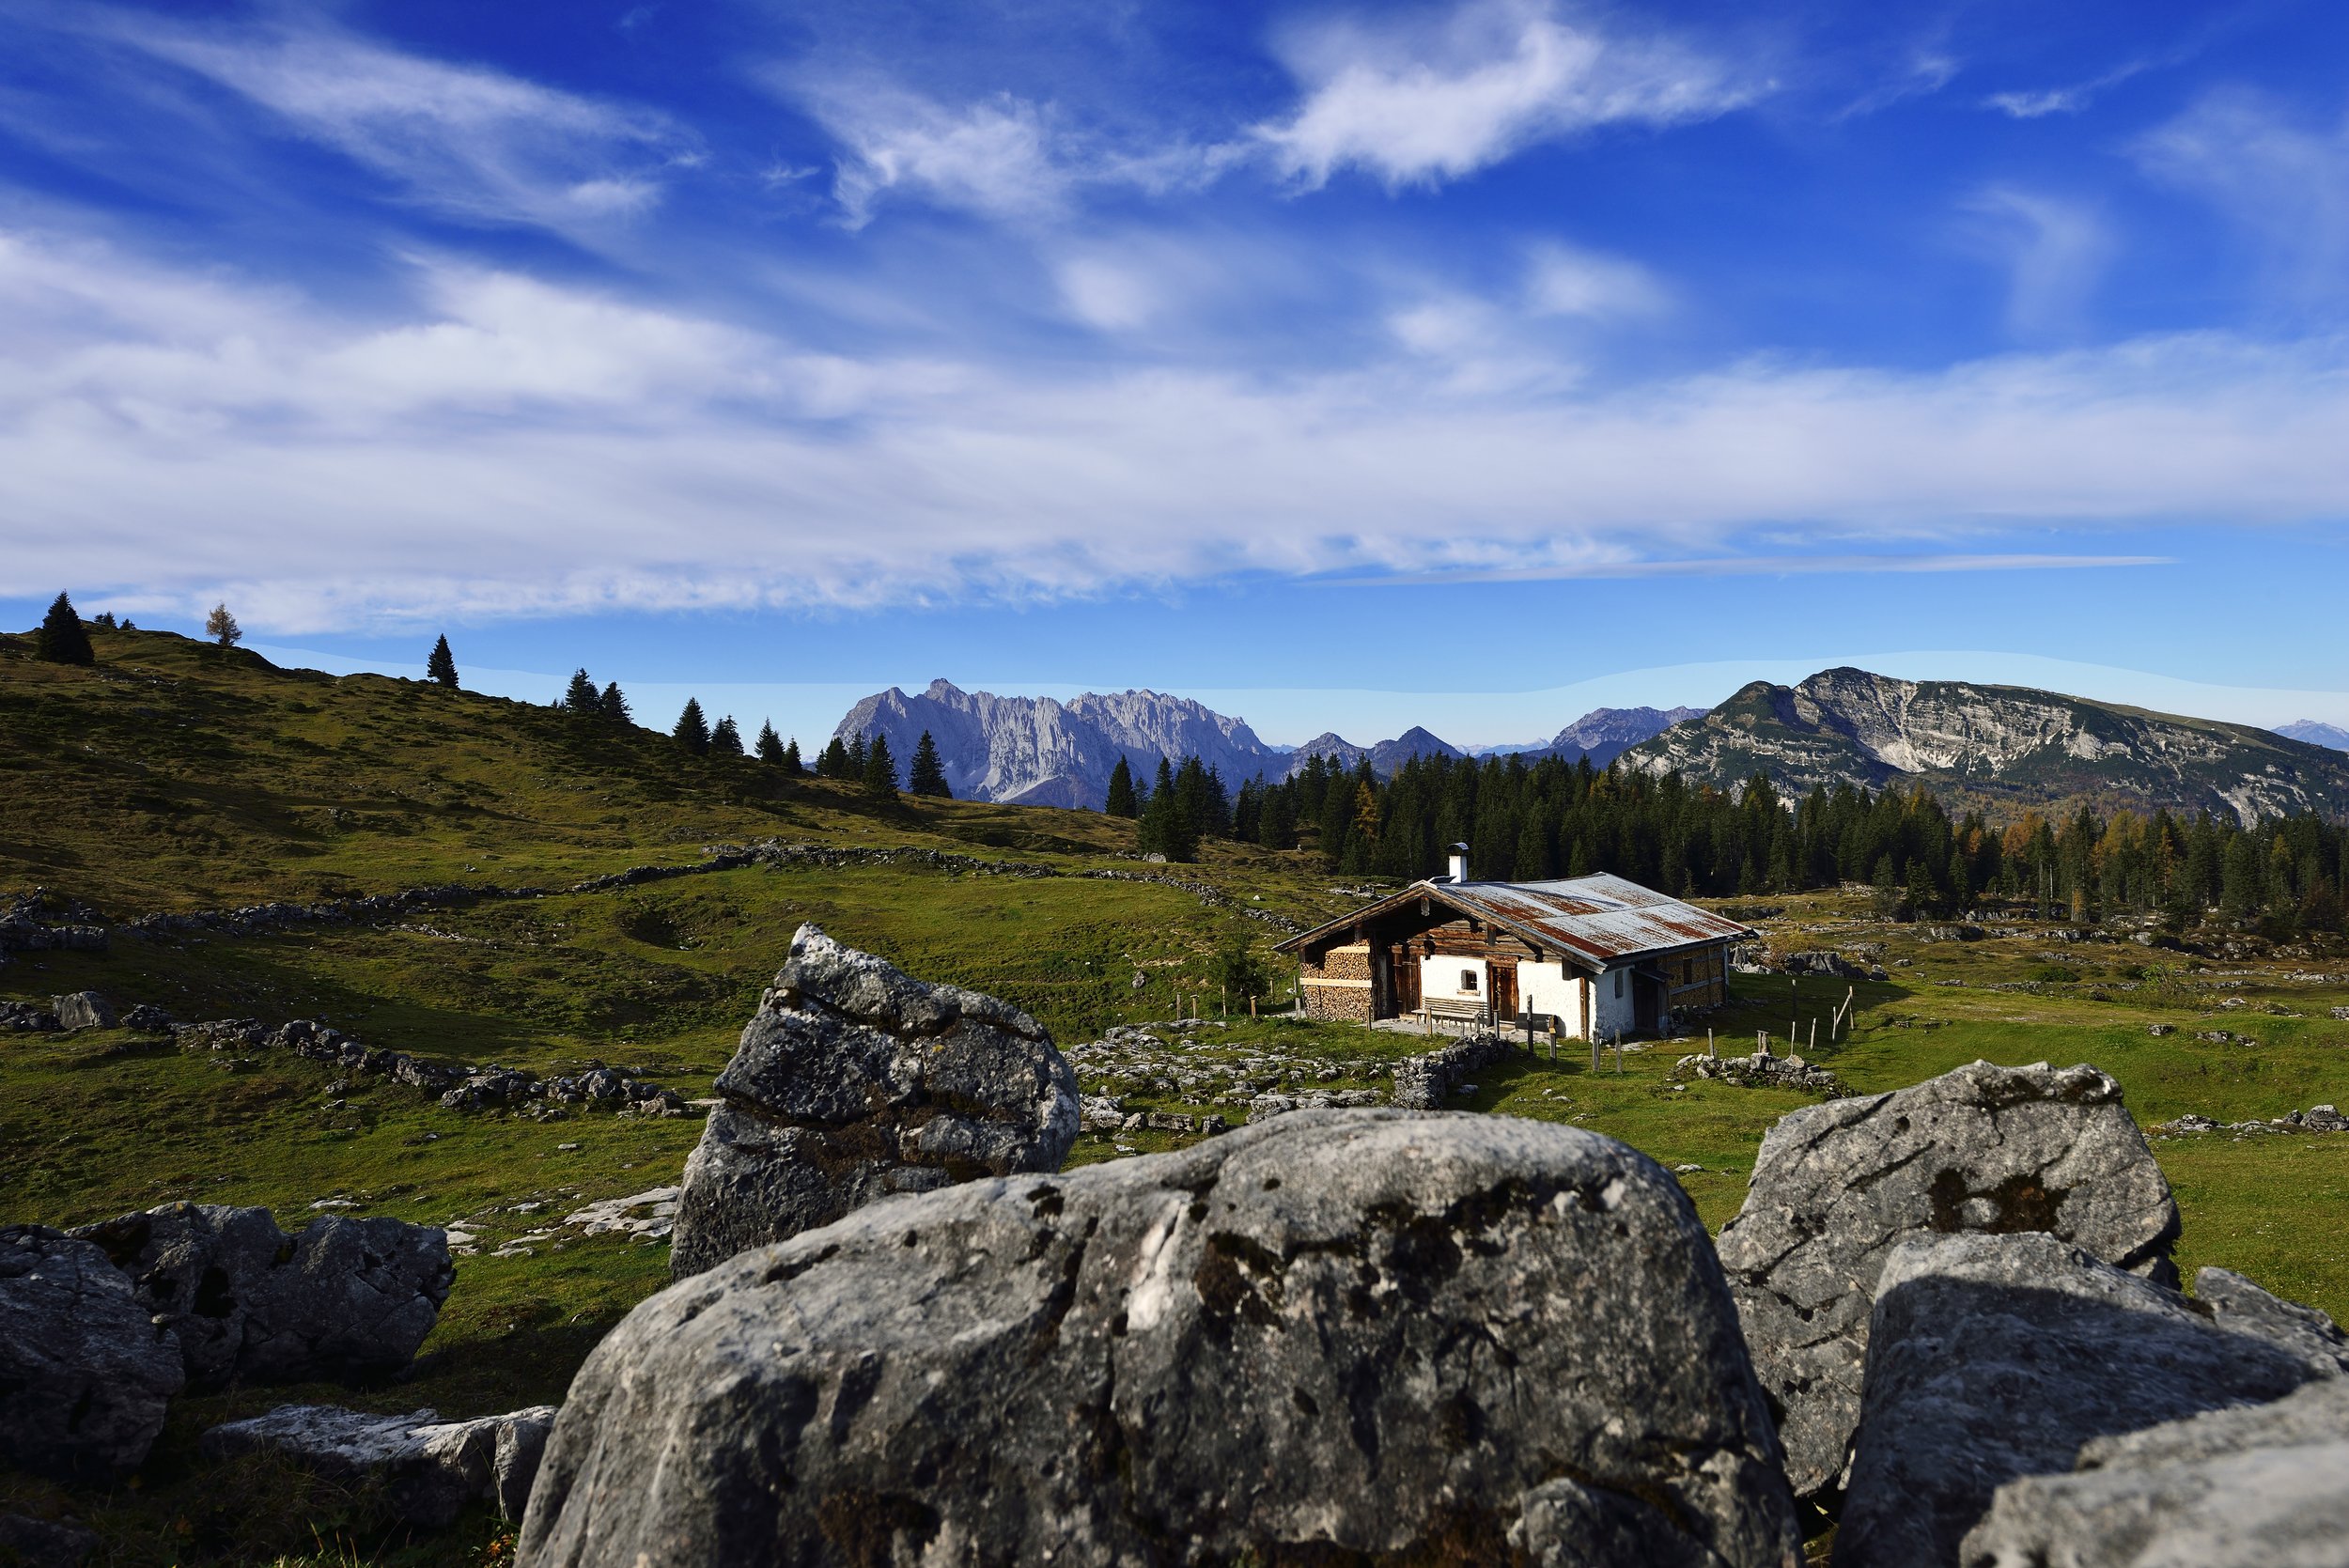 Hut on the Eggenalm in the Chiemgau Alps